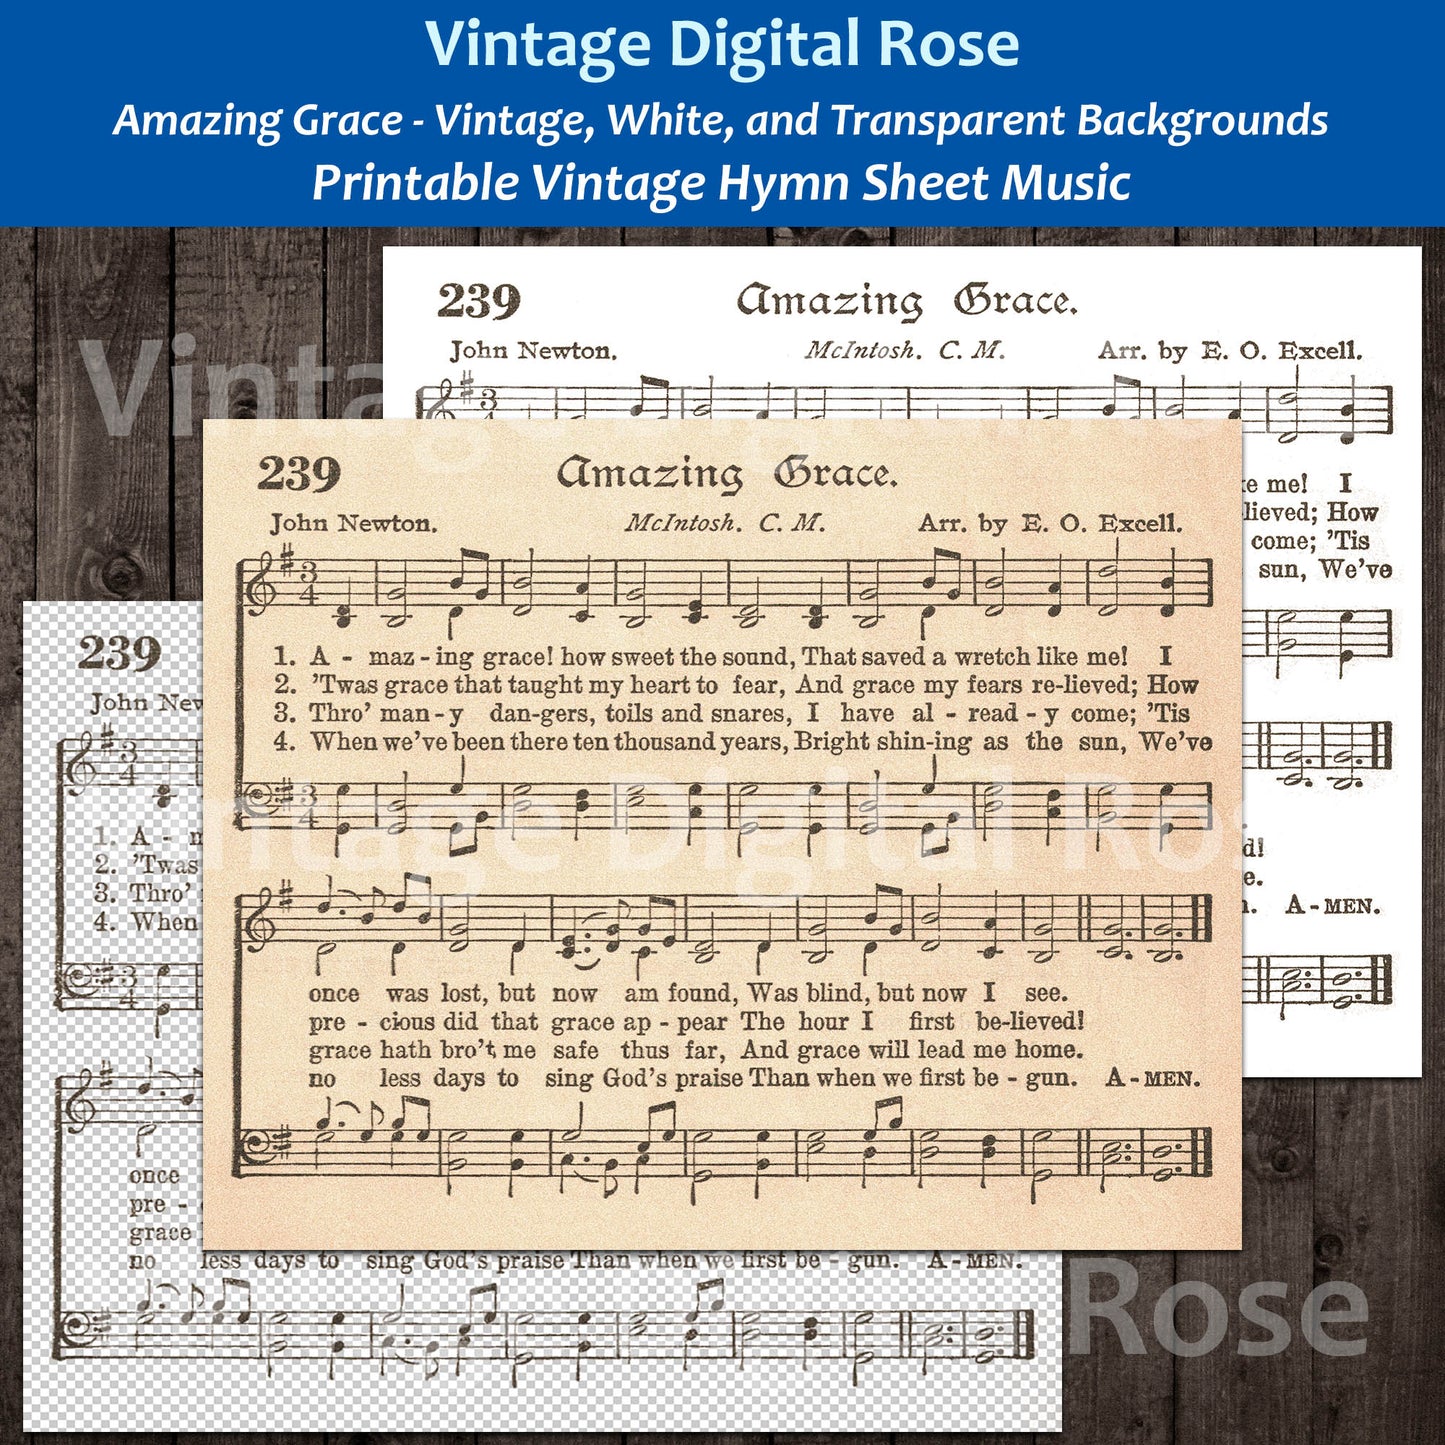 Amazing Grace Printable Vintage Hymn Sheet Music - Vintage, White, and Transparent Backgrounds JPG PNG Files